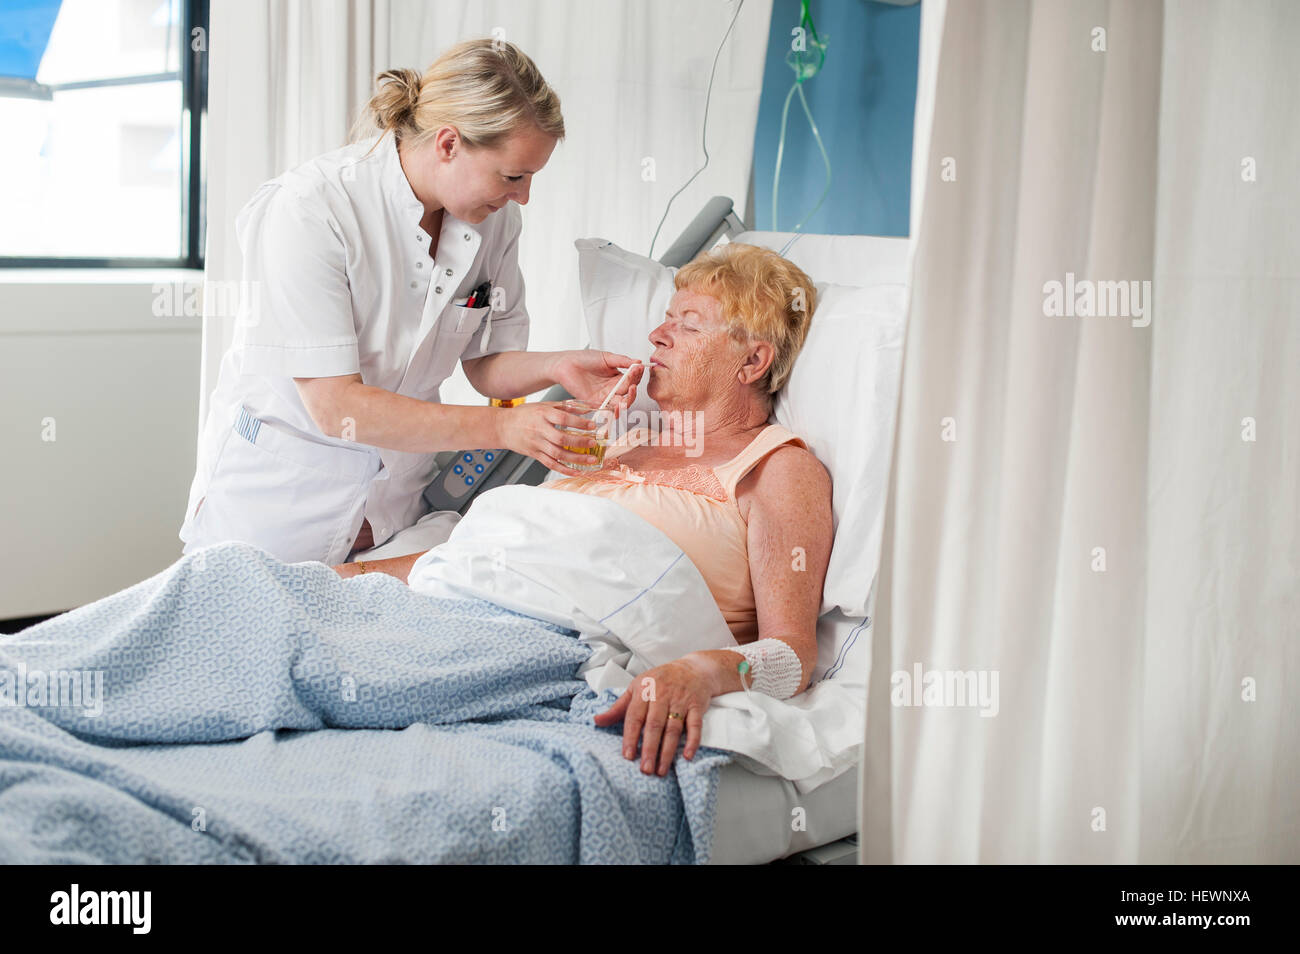 Nurse helping patient in hospital bed take a drink Stock Photo